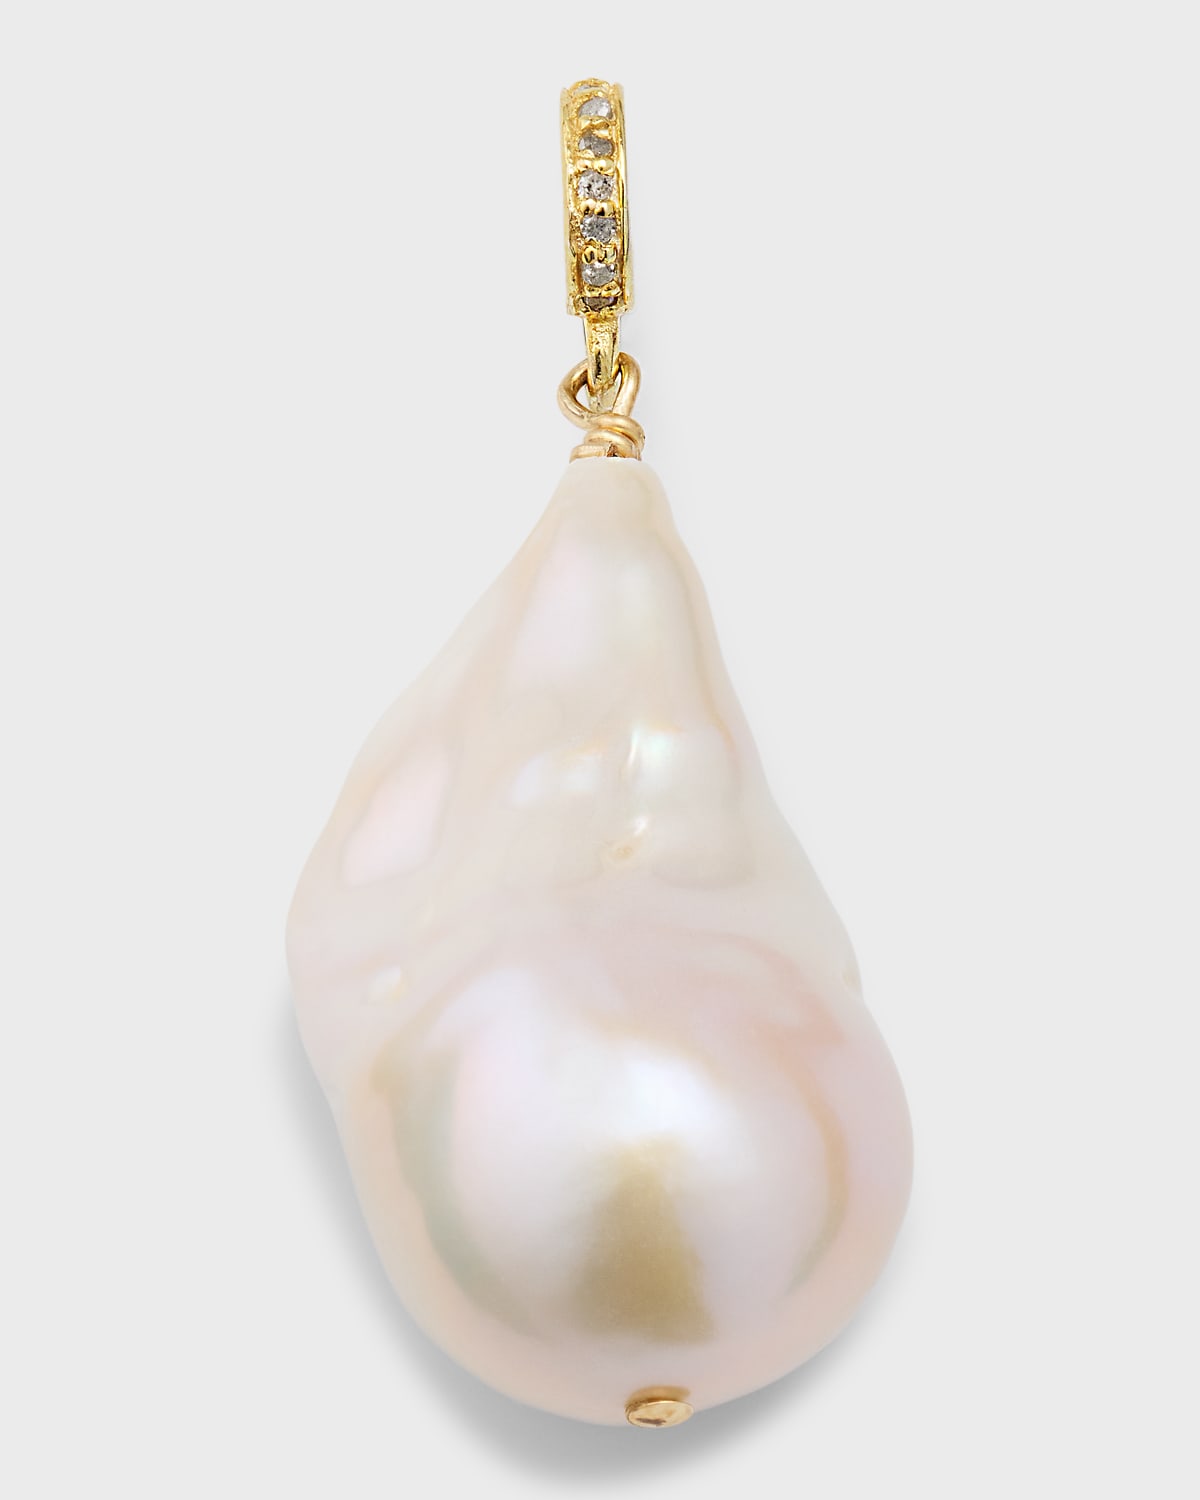 Large White Baroque Pearl Charm with Diamond Jump Ring, 15-18mm